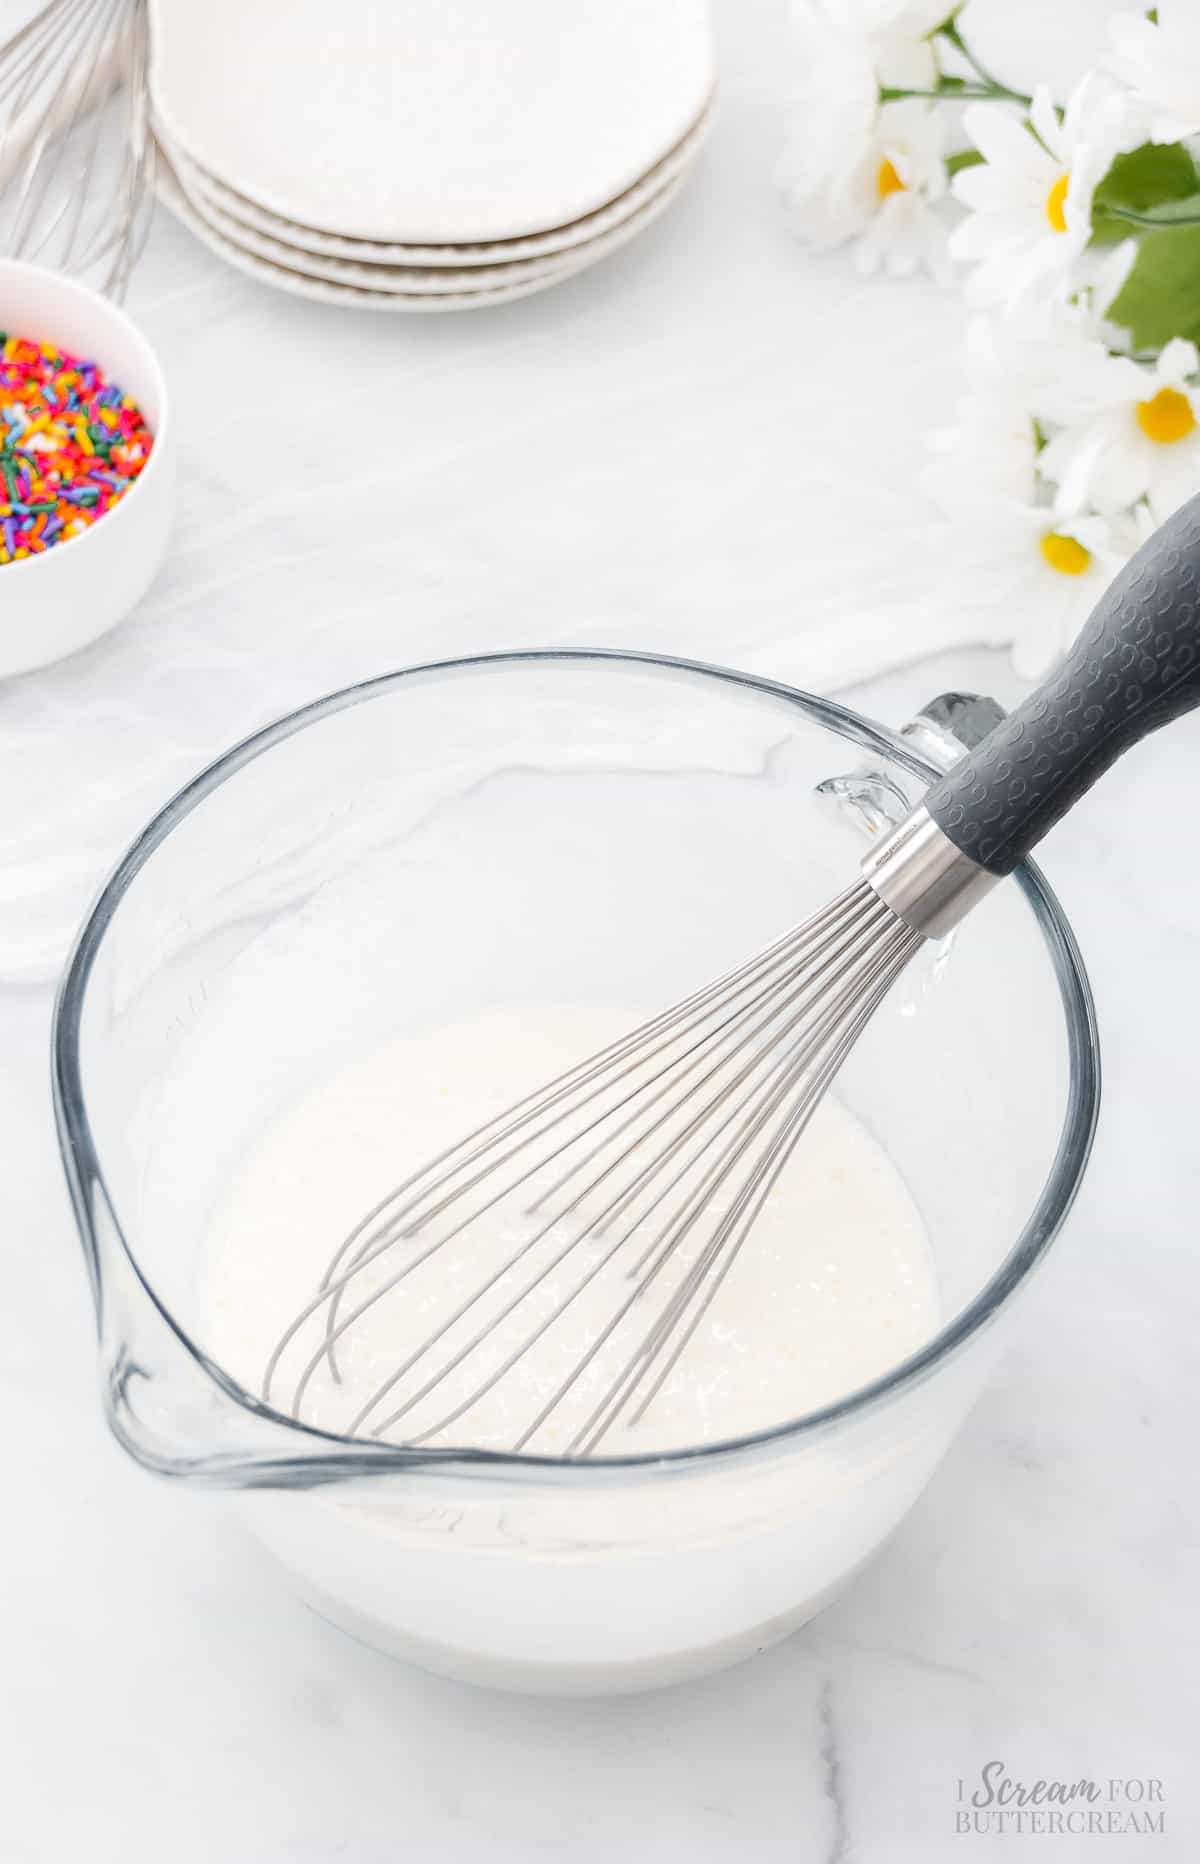 Liquid cake batter ingredients in a glass bowl with a whisk.